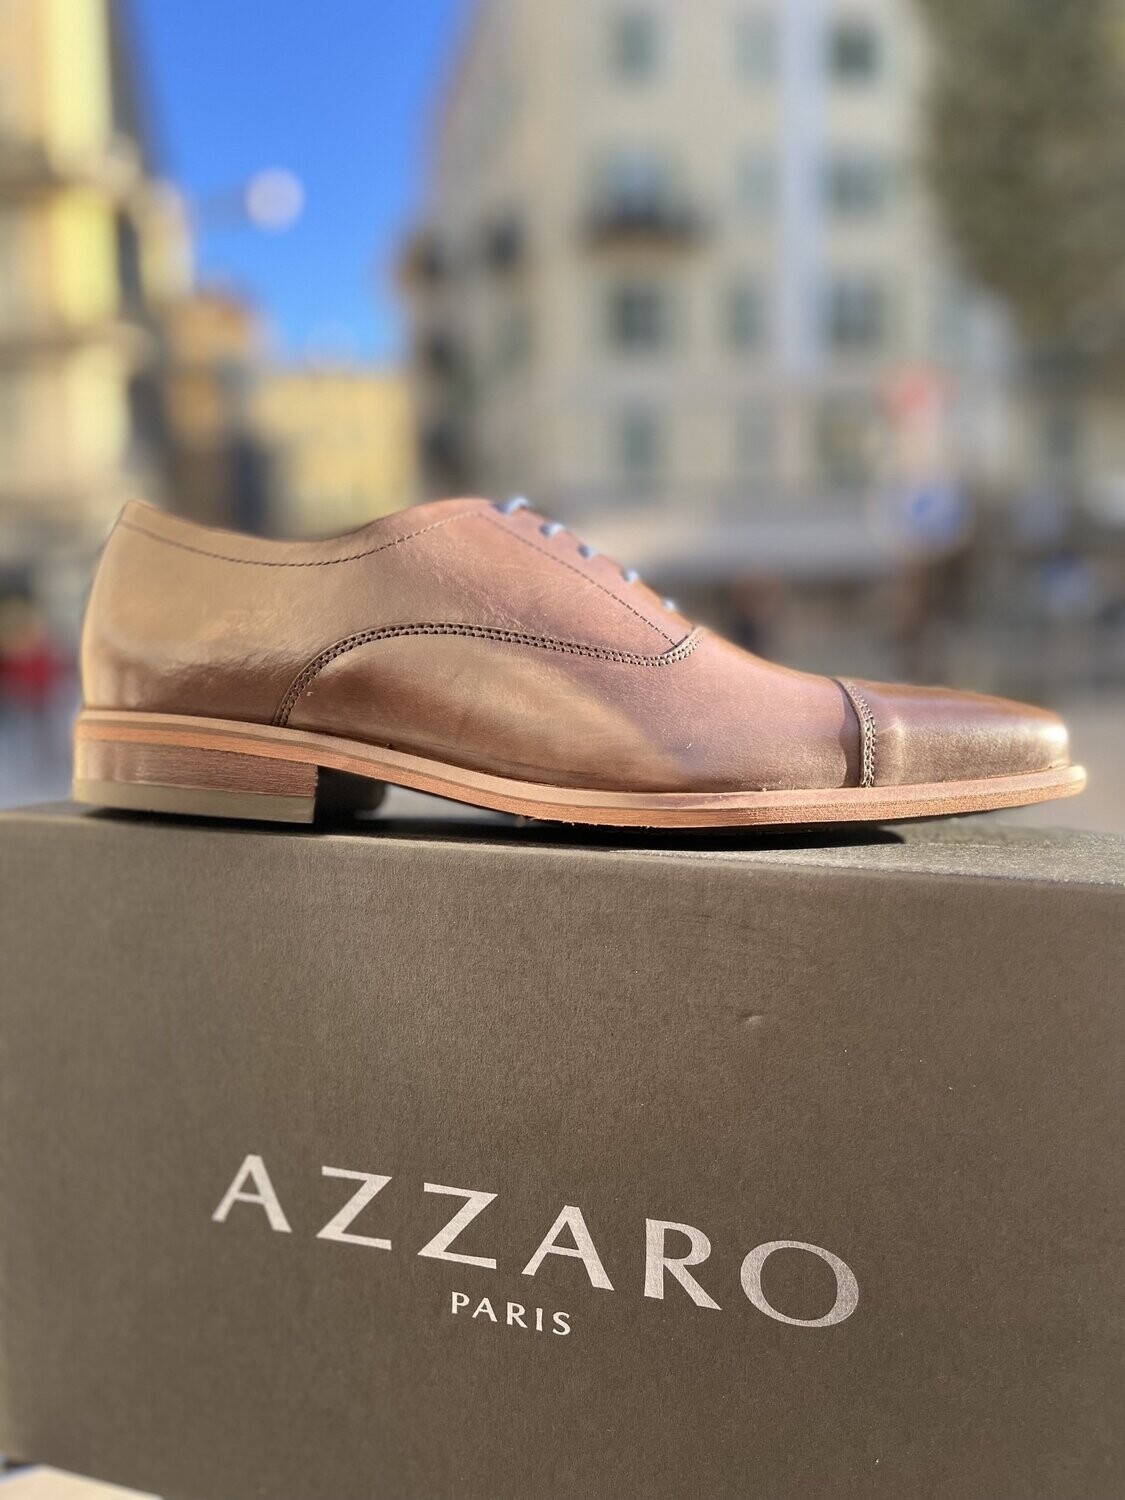 CHAUSSURE CUIR CHATAIGNE AZZARO - MAGASIN CHAUSSURE À NICE